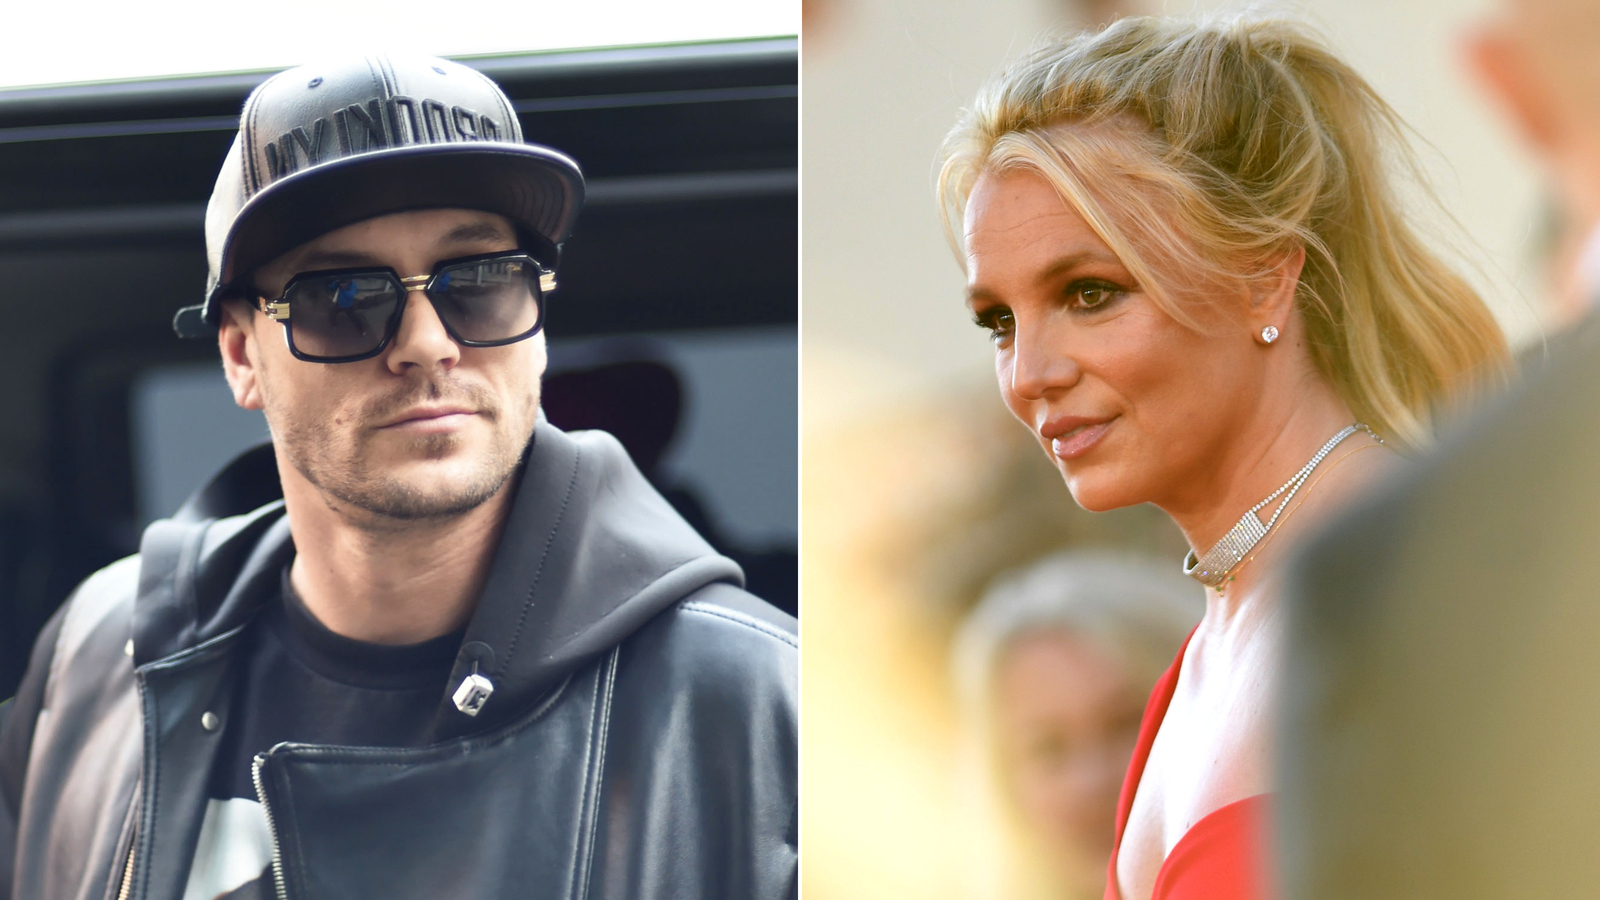 Britney Spears’ lawyer in response to Kevin Federline​: ‘We will not tolerate bullying’